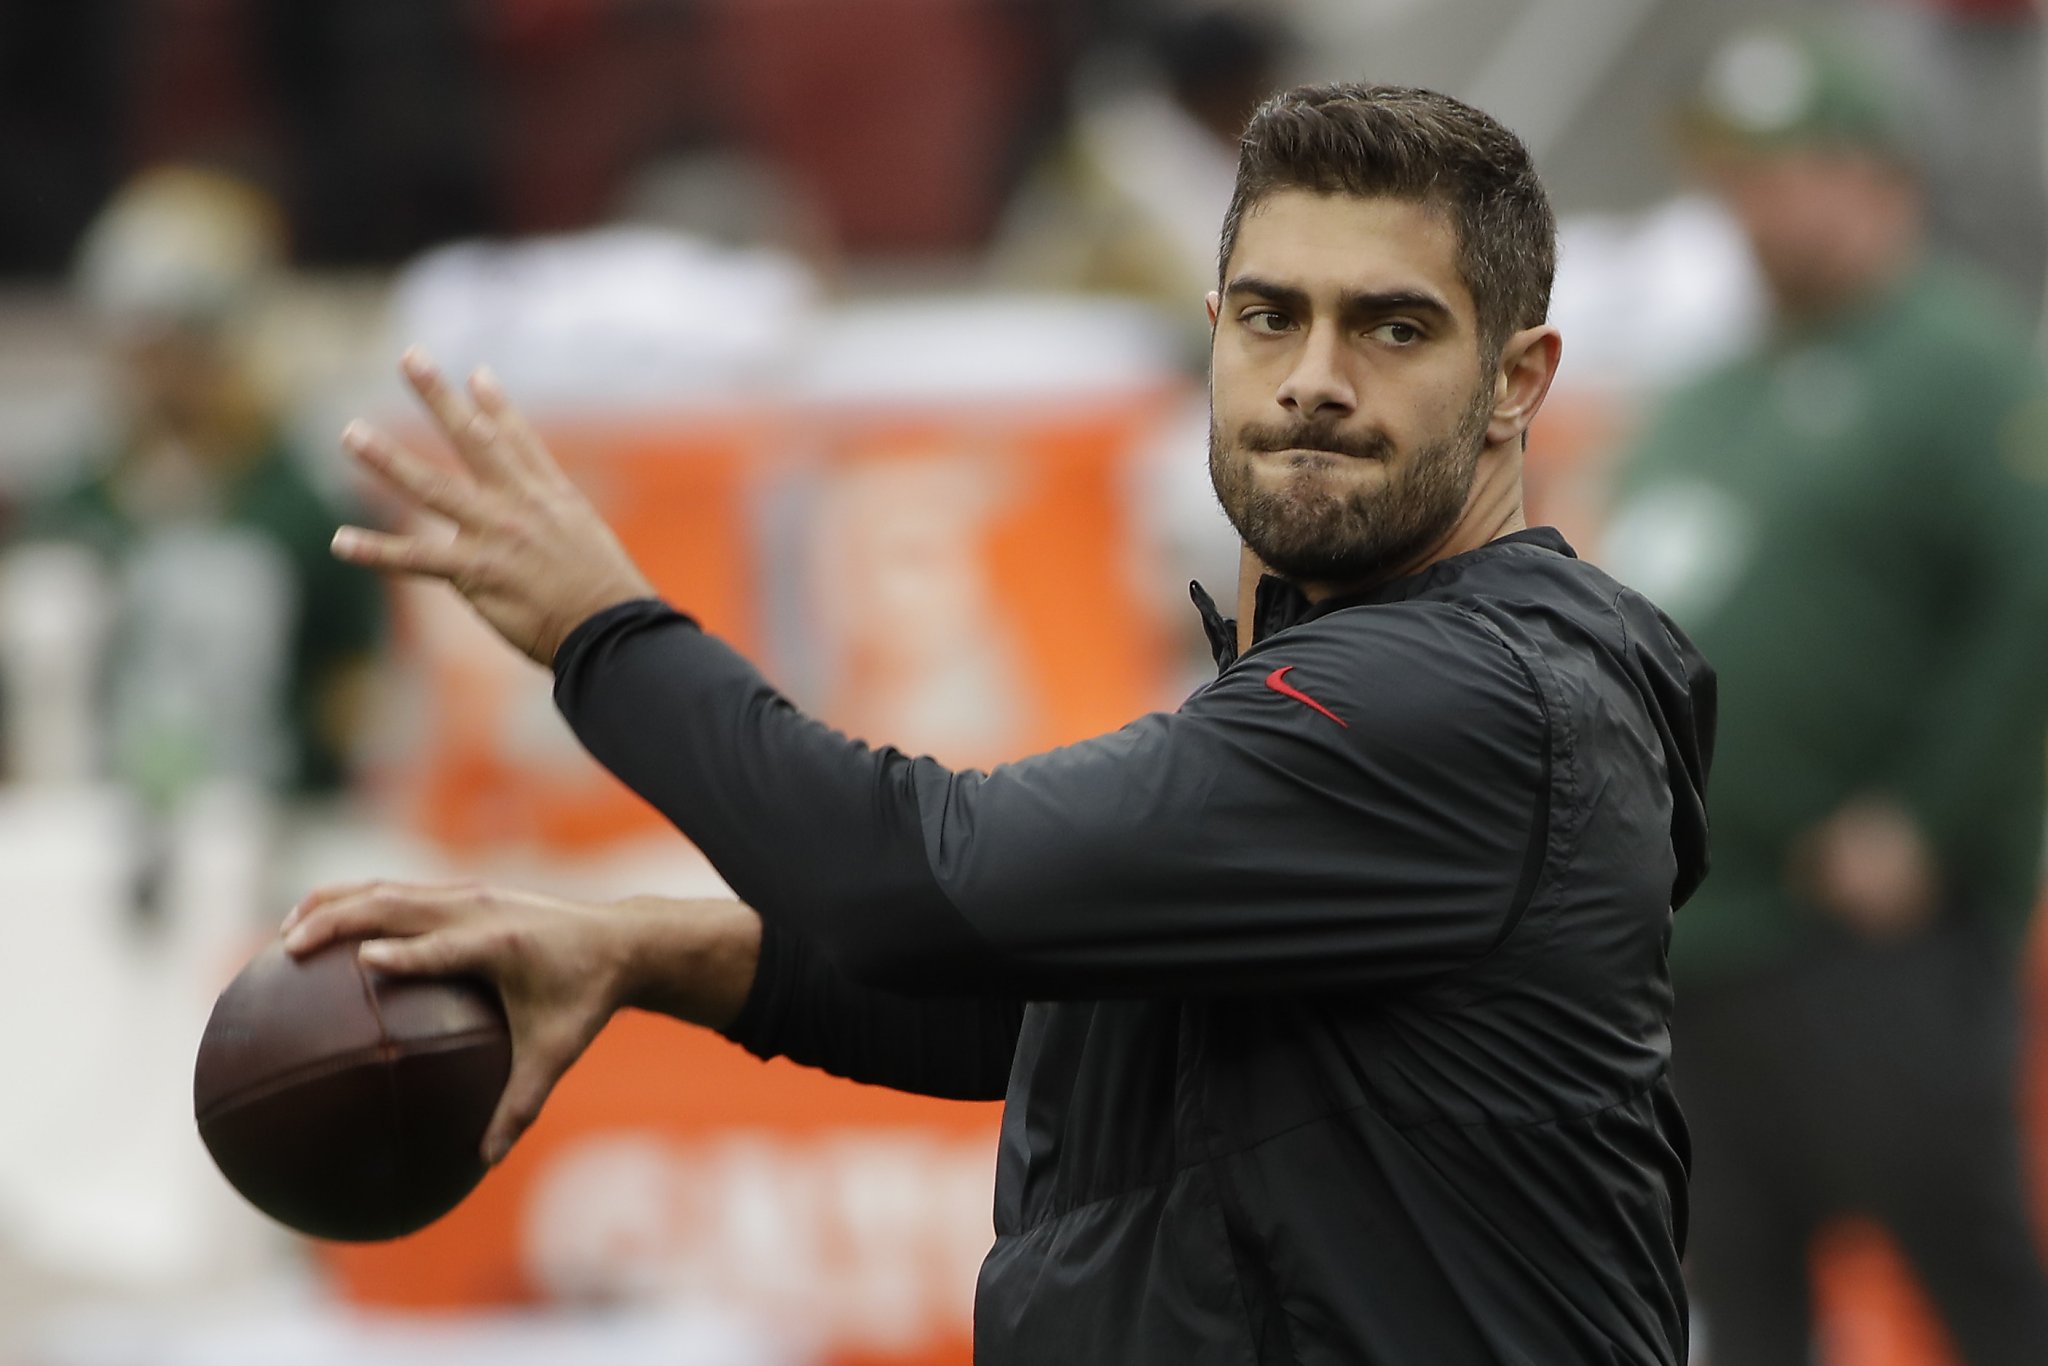 49ers’ Jimmy Garoppolo has Super Bowl rings, but do they count?